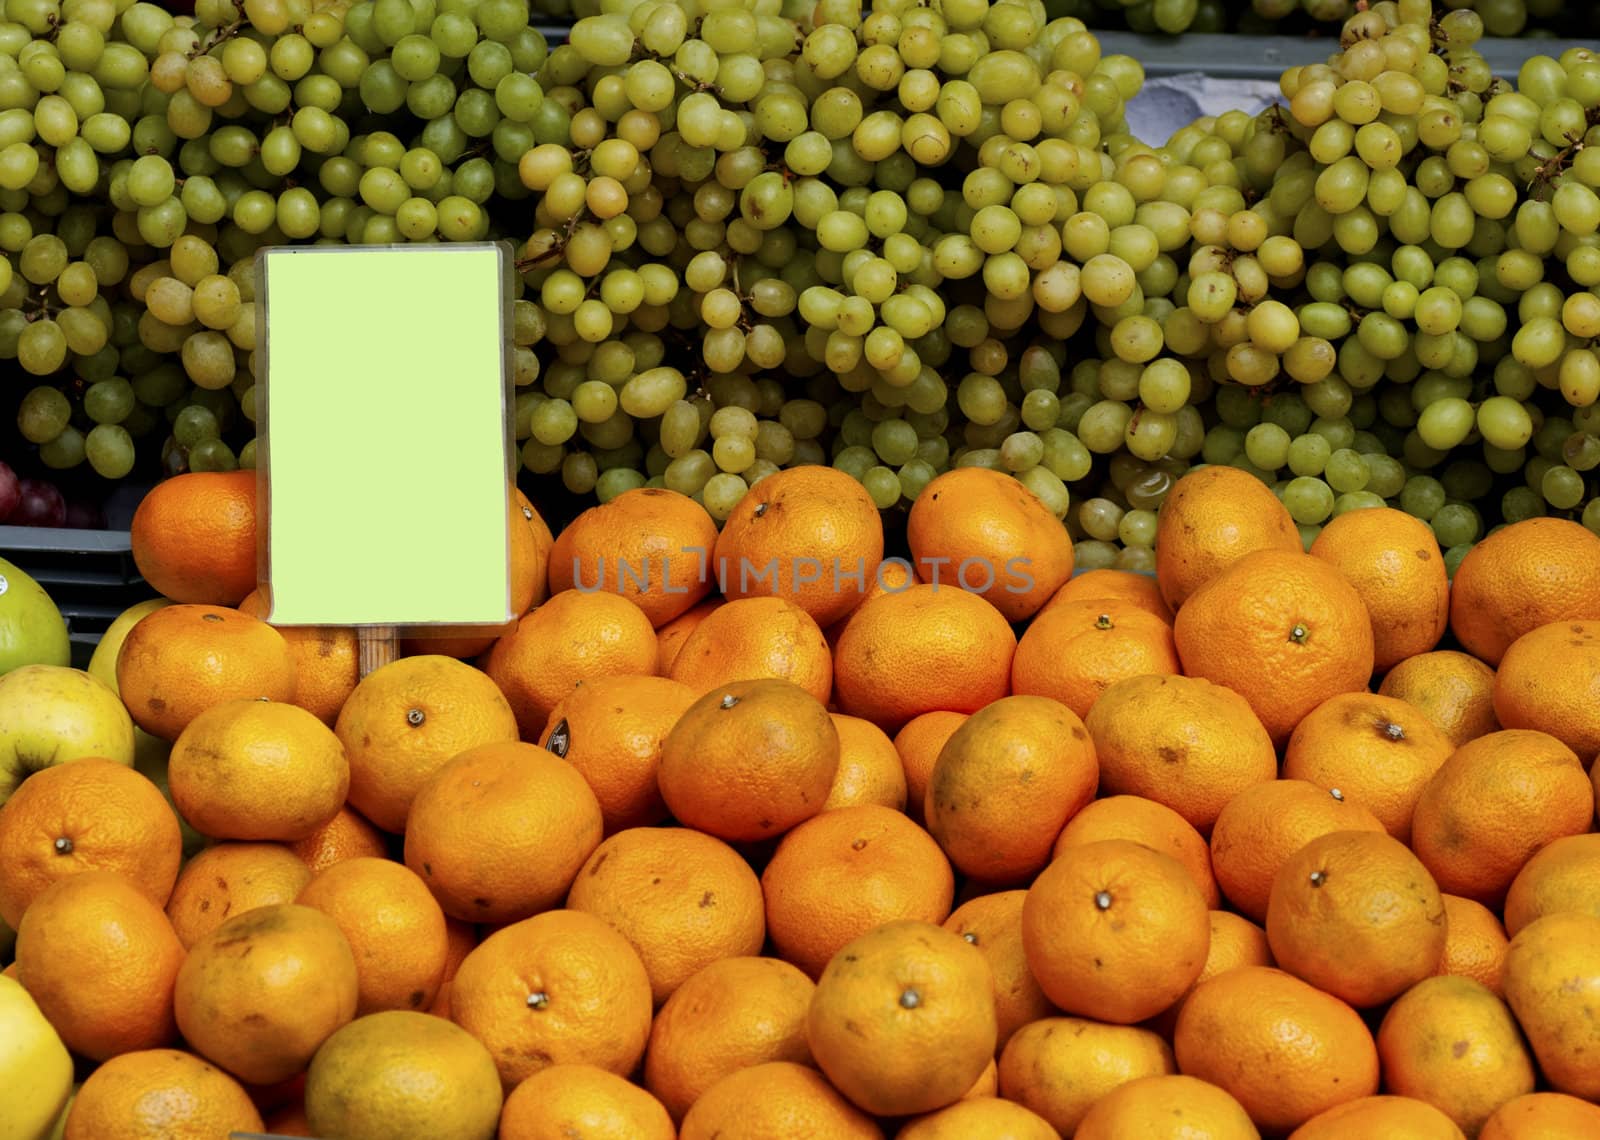 green grapes and oranges with a sign at a market